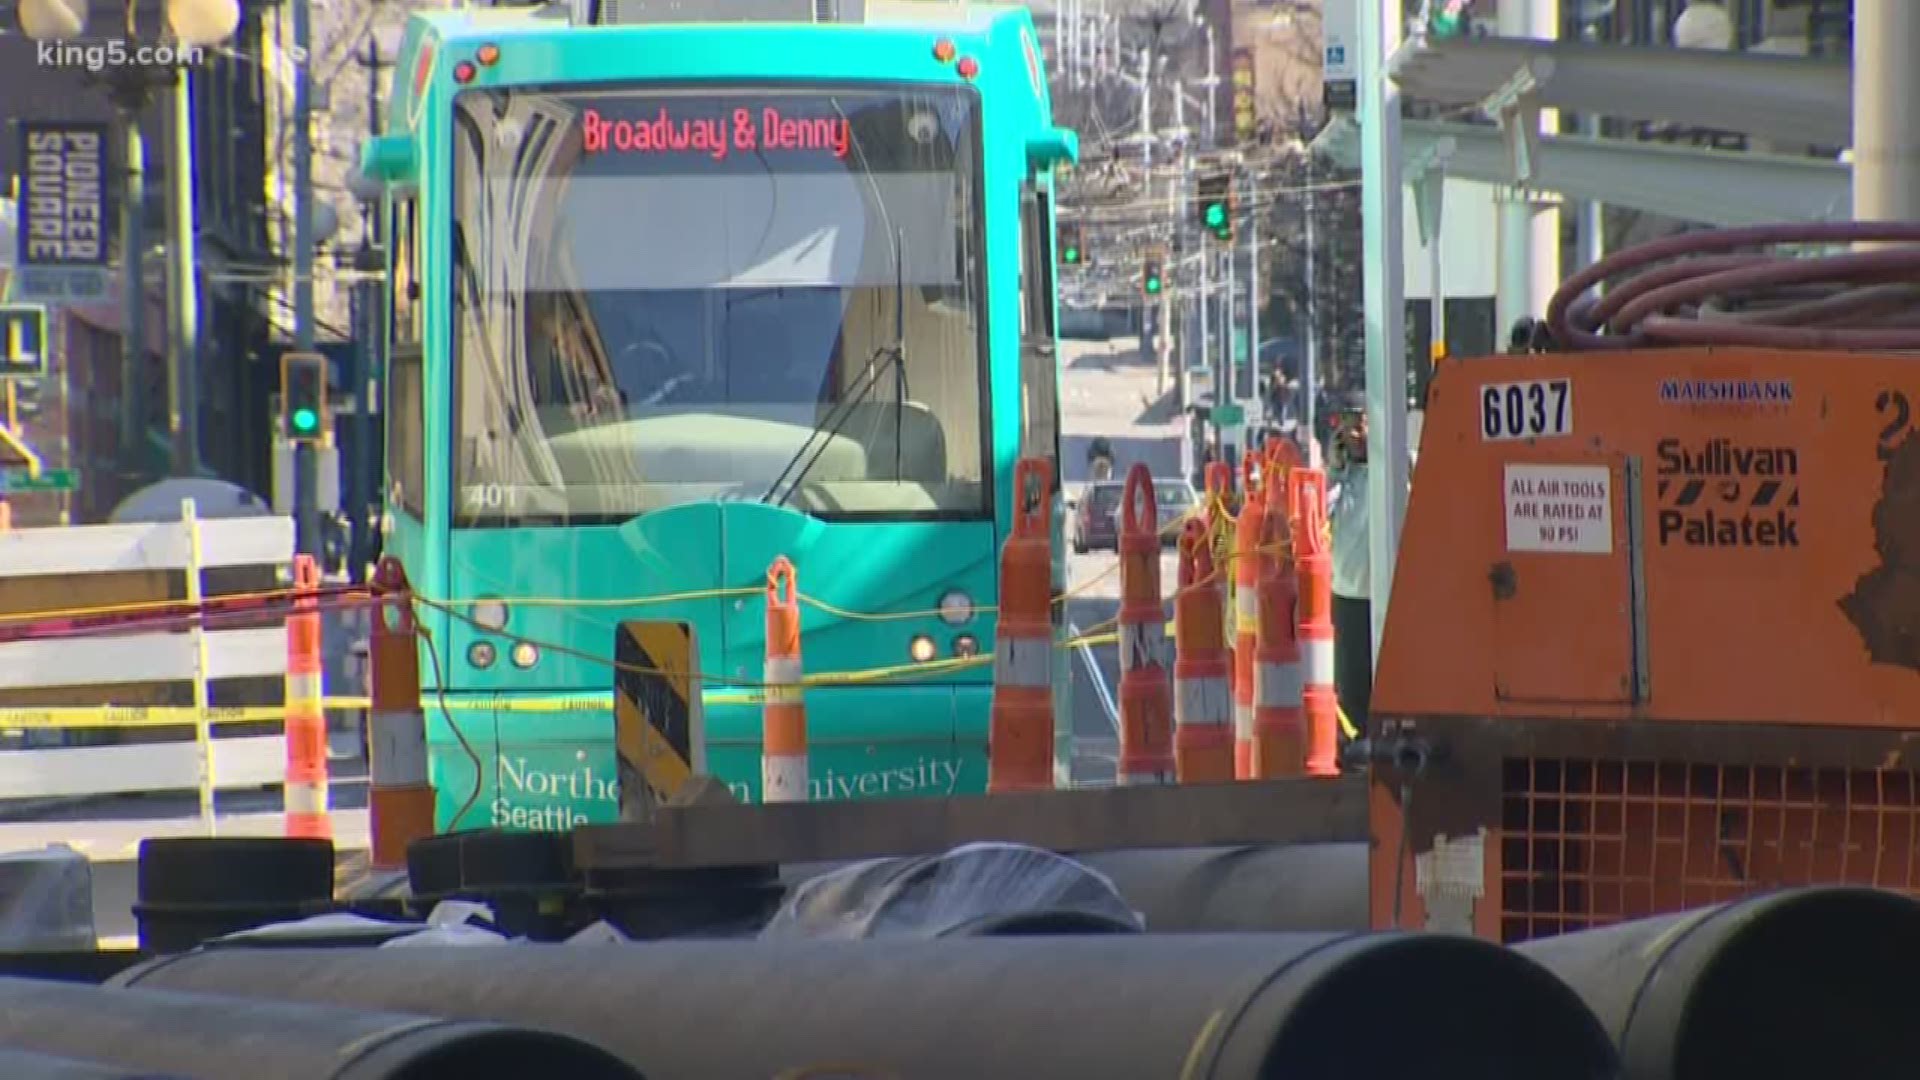 The Seattle Council approved spending $9 million for further design and planning on the controversial streetcar, which was put on hold after costs skyrocketed. KING 5's Chris Daniels reports.